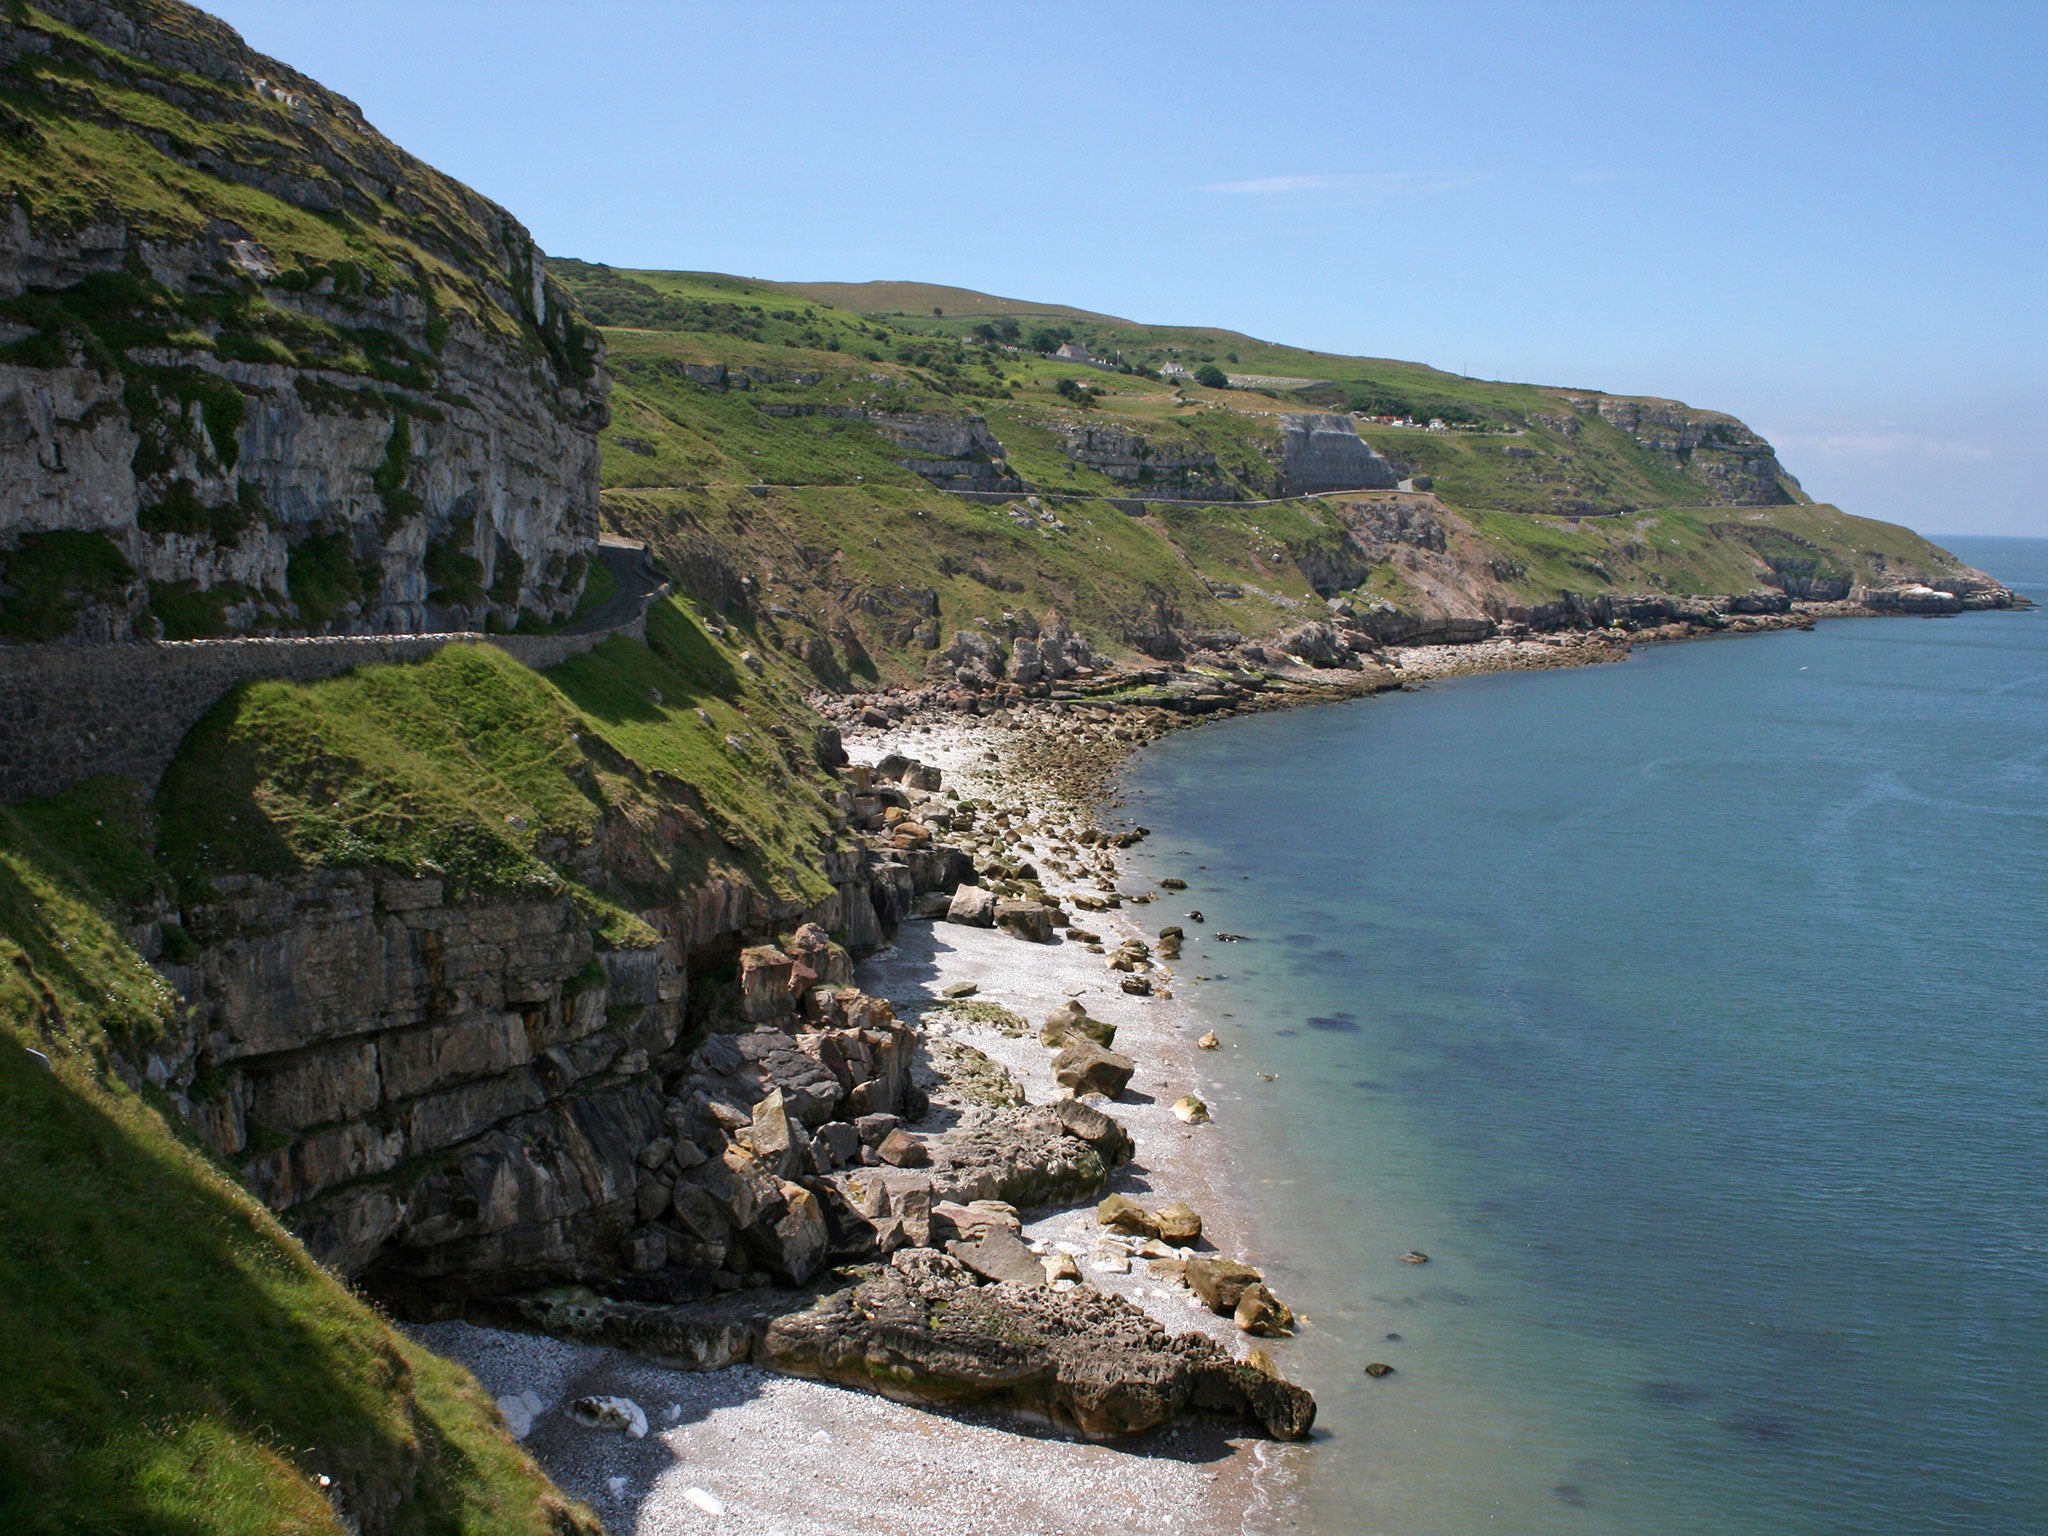 The Great Orme promontory, overlooking Llandudno, Wales